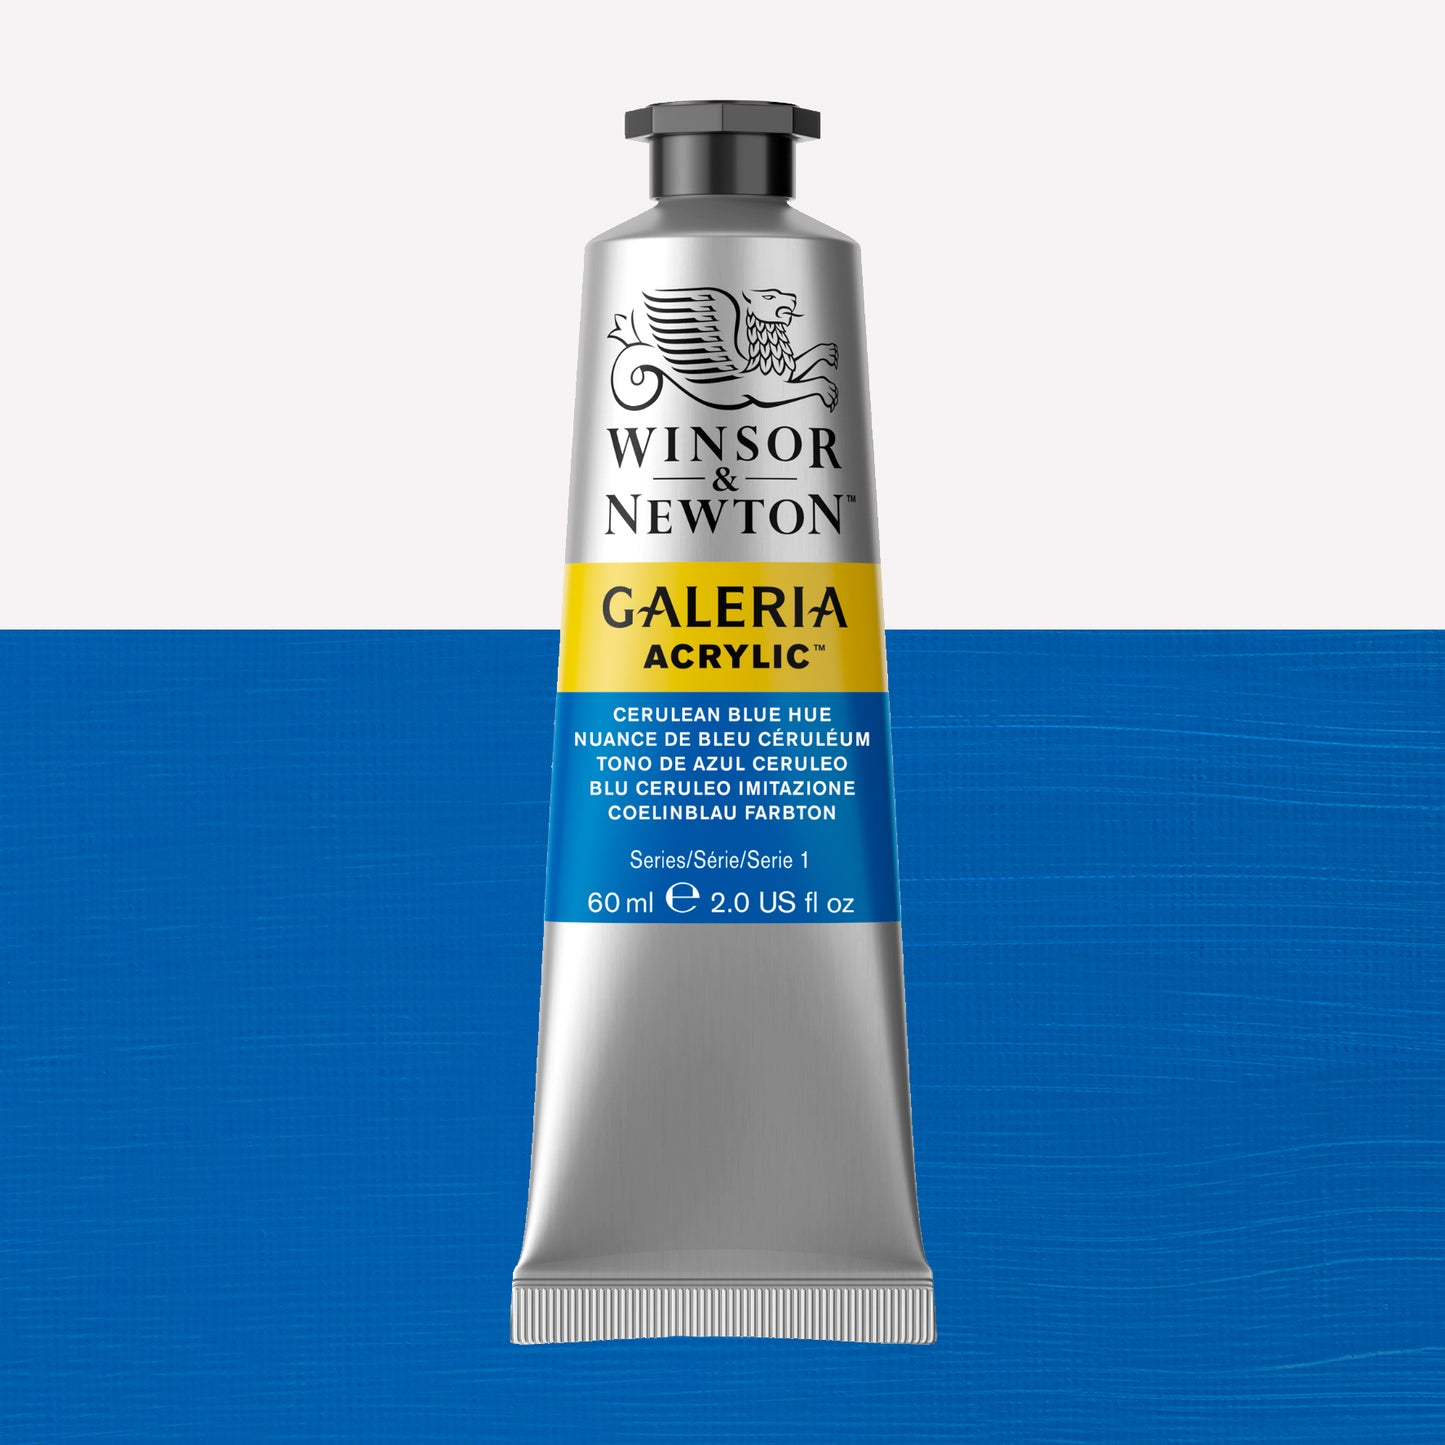 A 60ml tube of vibrant Galeria Acrylic paint in the shade Cerulean Blue Hue. This professional-quality paint is packaged in a silver tube with a black lid. Made by Winsor and Newton.